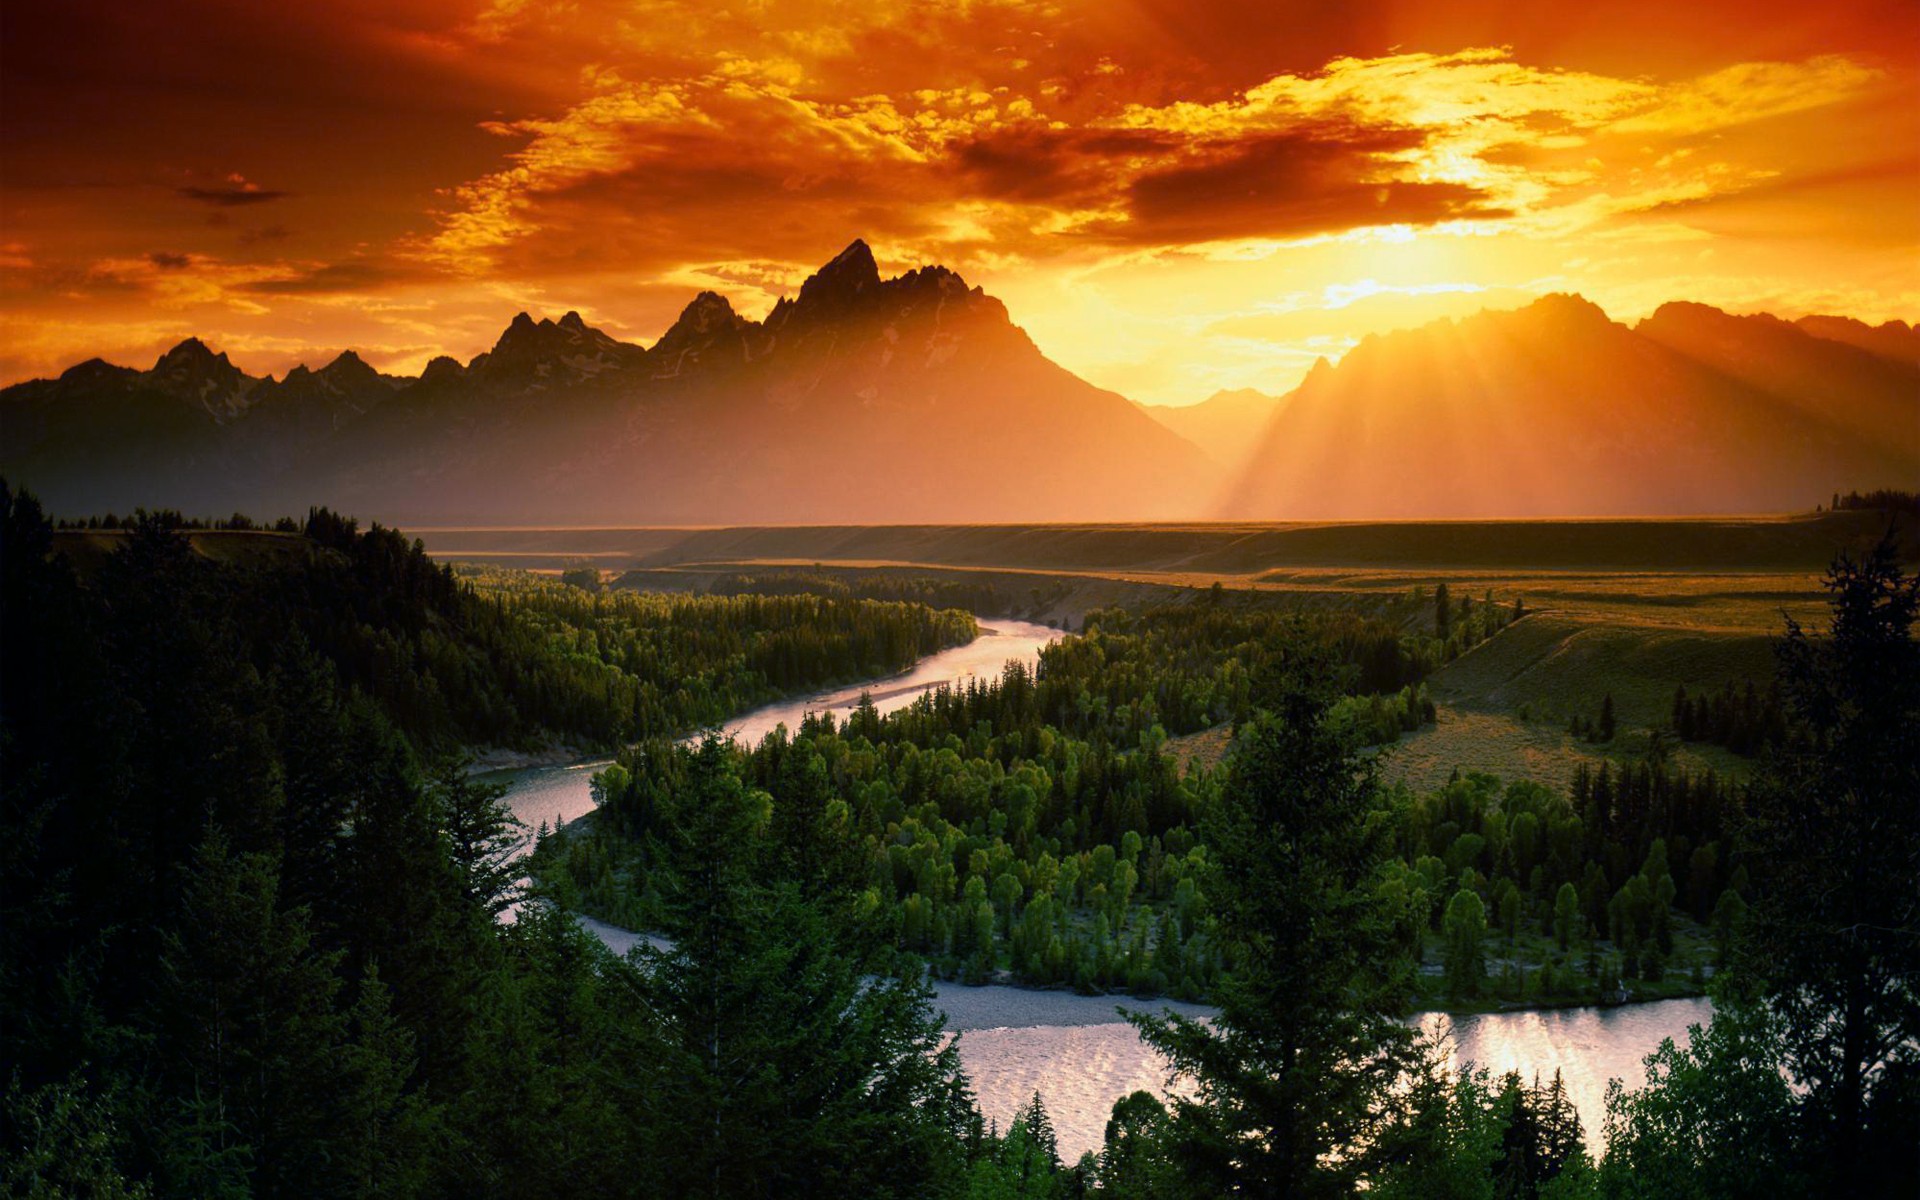 General 1920x1200 nature sunlight river trees sky mountains landscape orange sunset sun rays pine trees forest clouds Snake River overlook Wyoming USA Grand Teton National Park